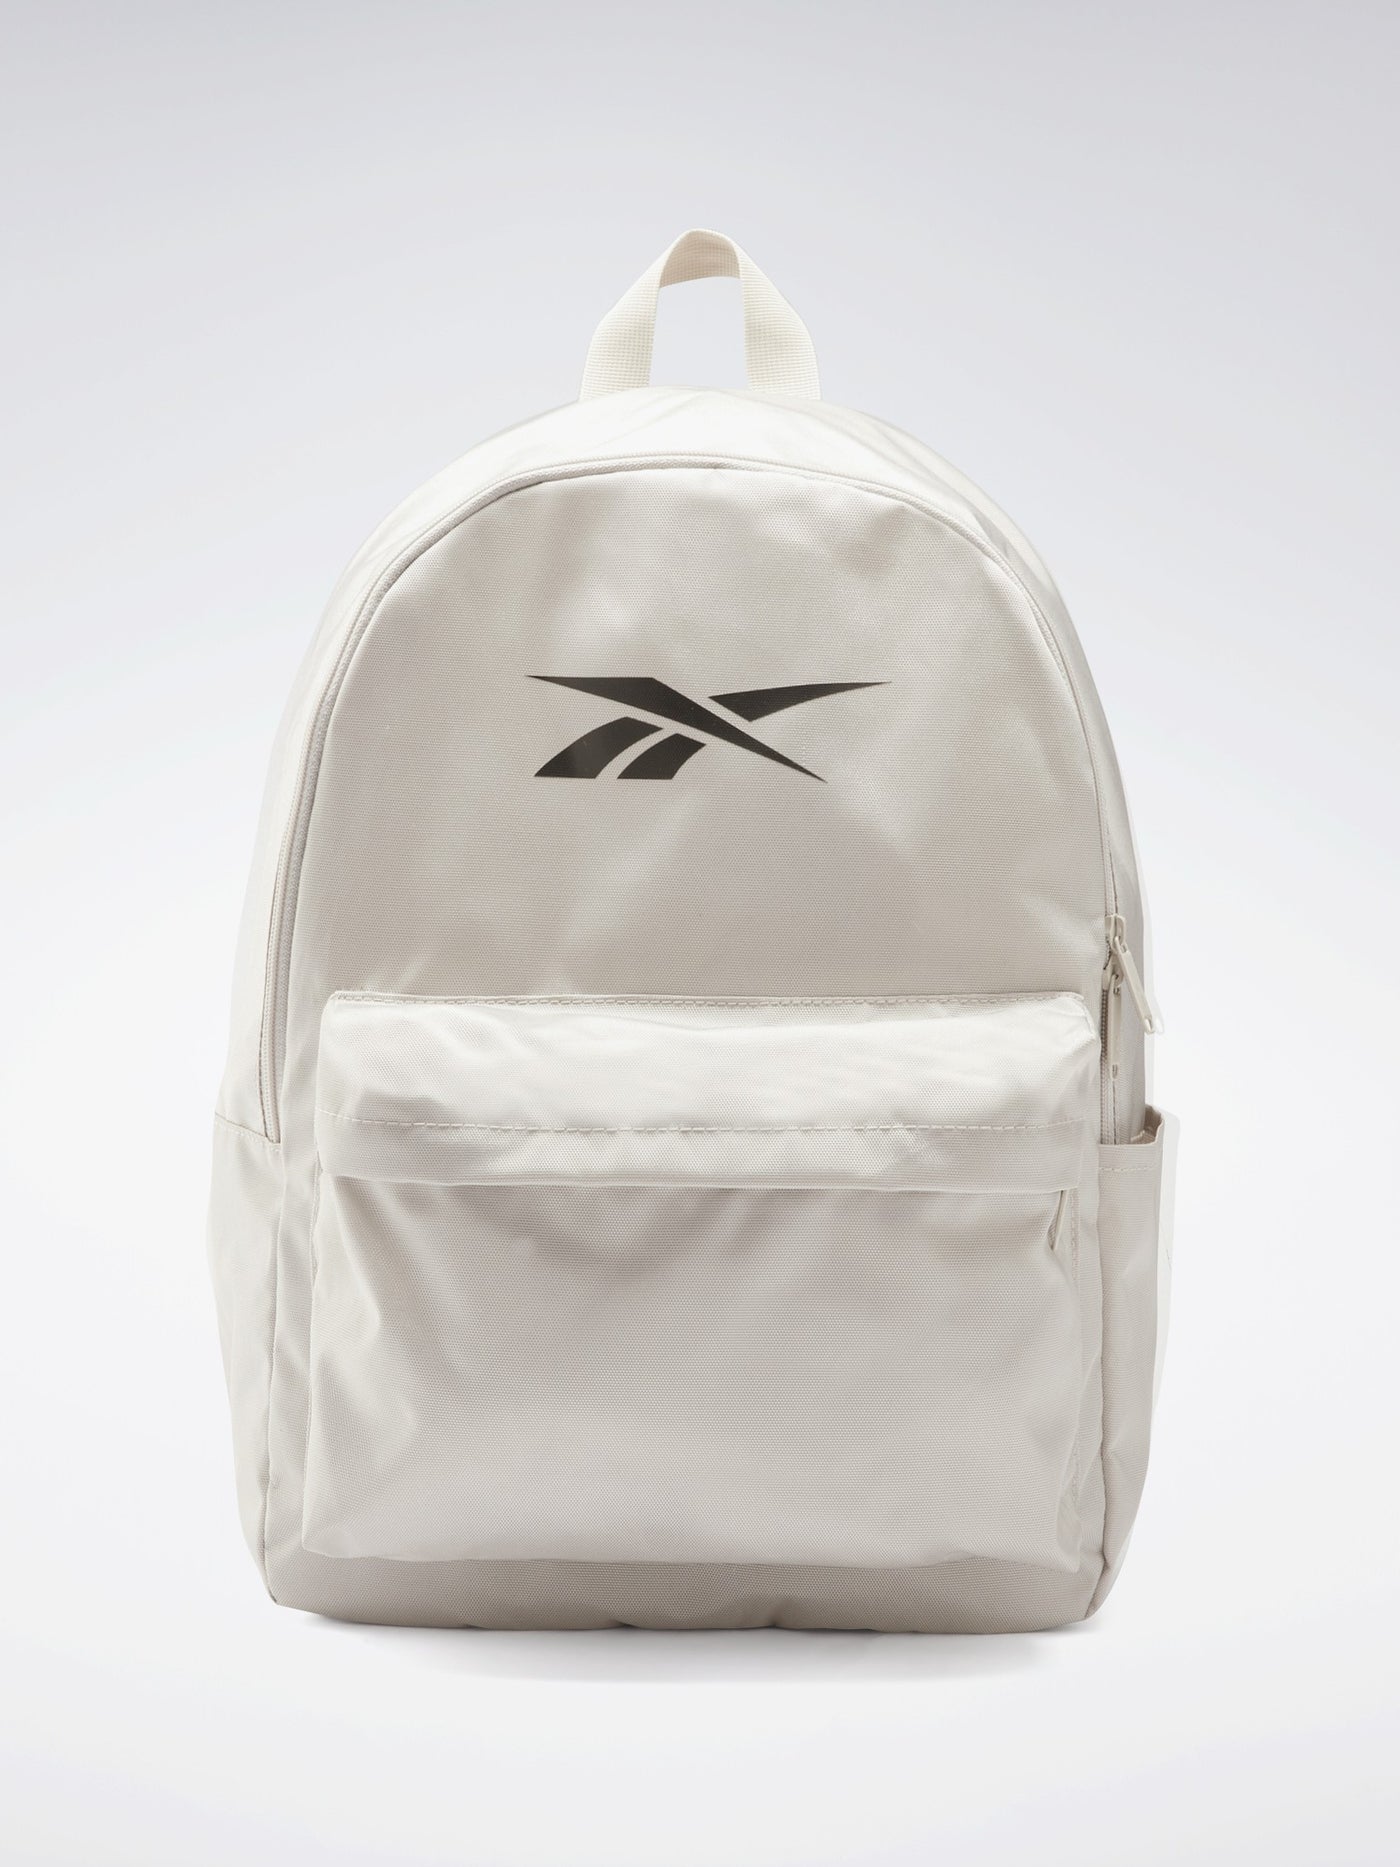 Unisex Backpack - Front Pocket with Zipper Closure